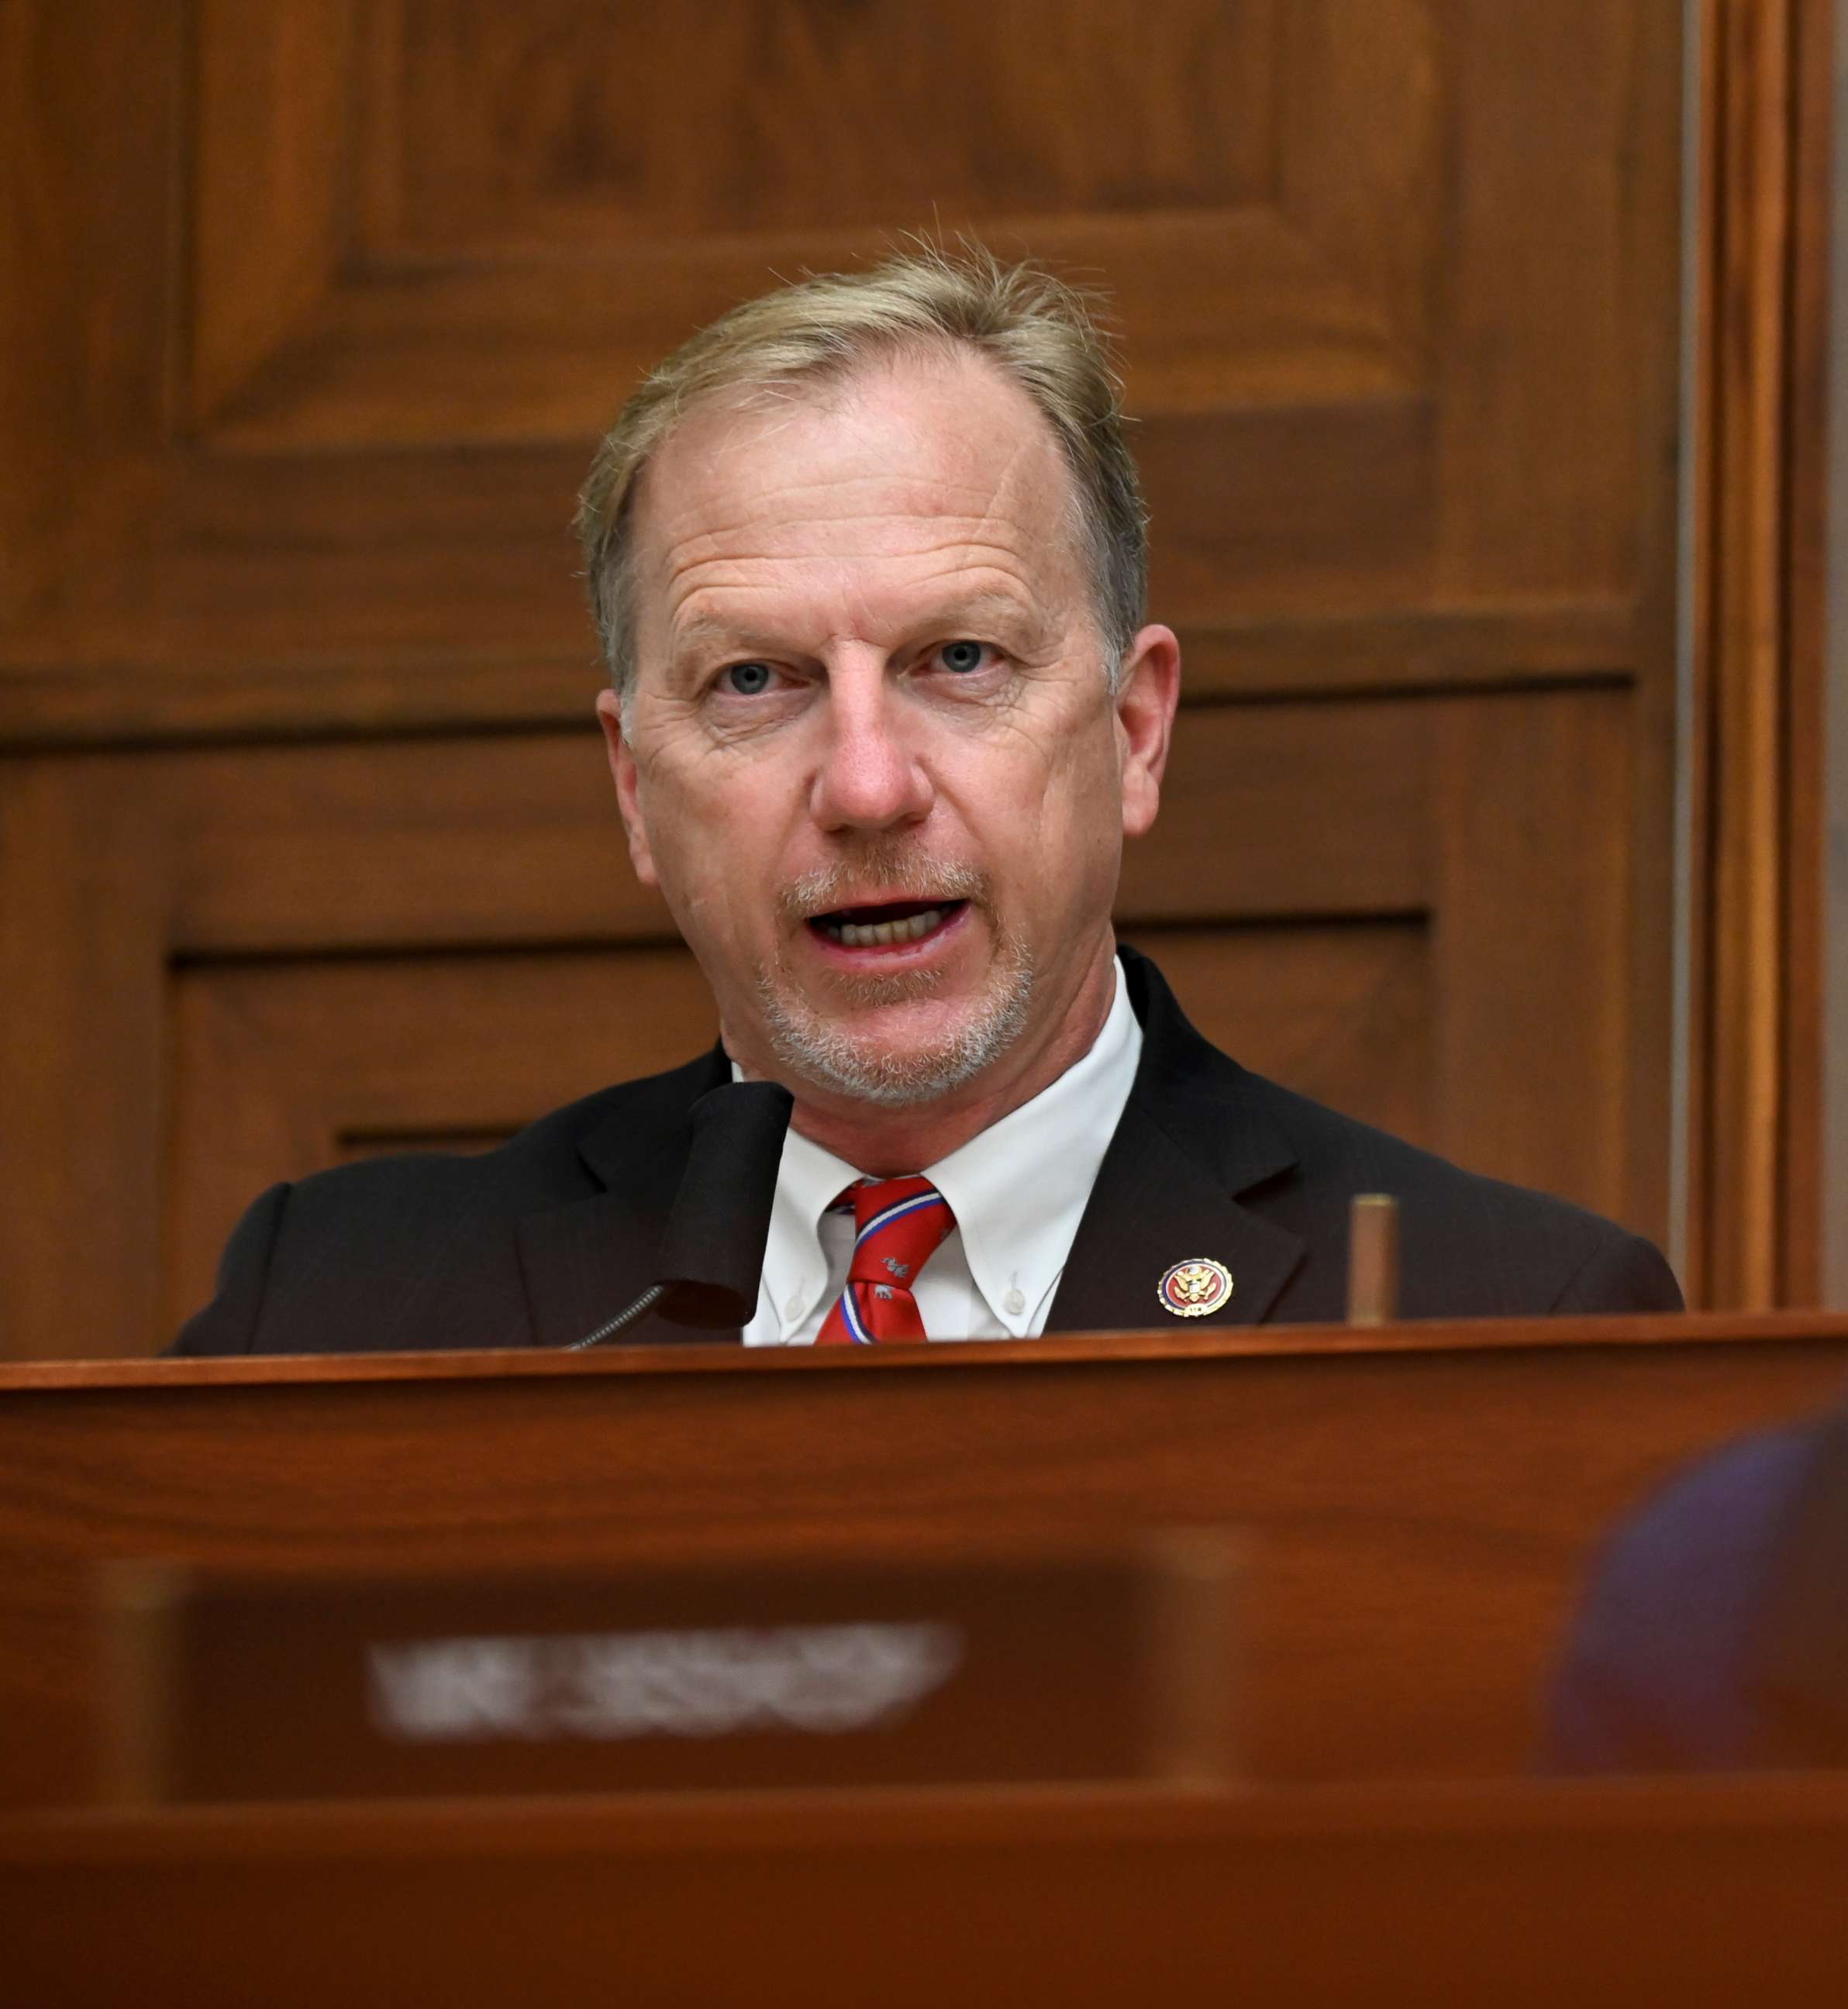 PHOTO: Kevin Hern speaks during a hearing in Washington, D.C., July 17, 2020.